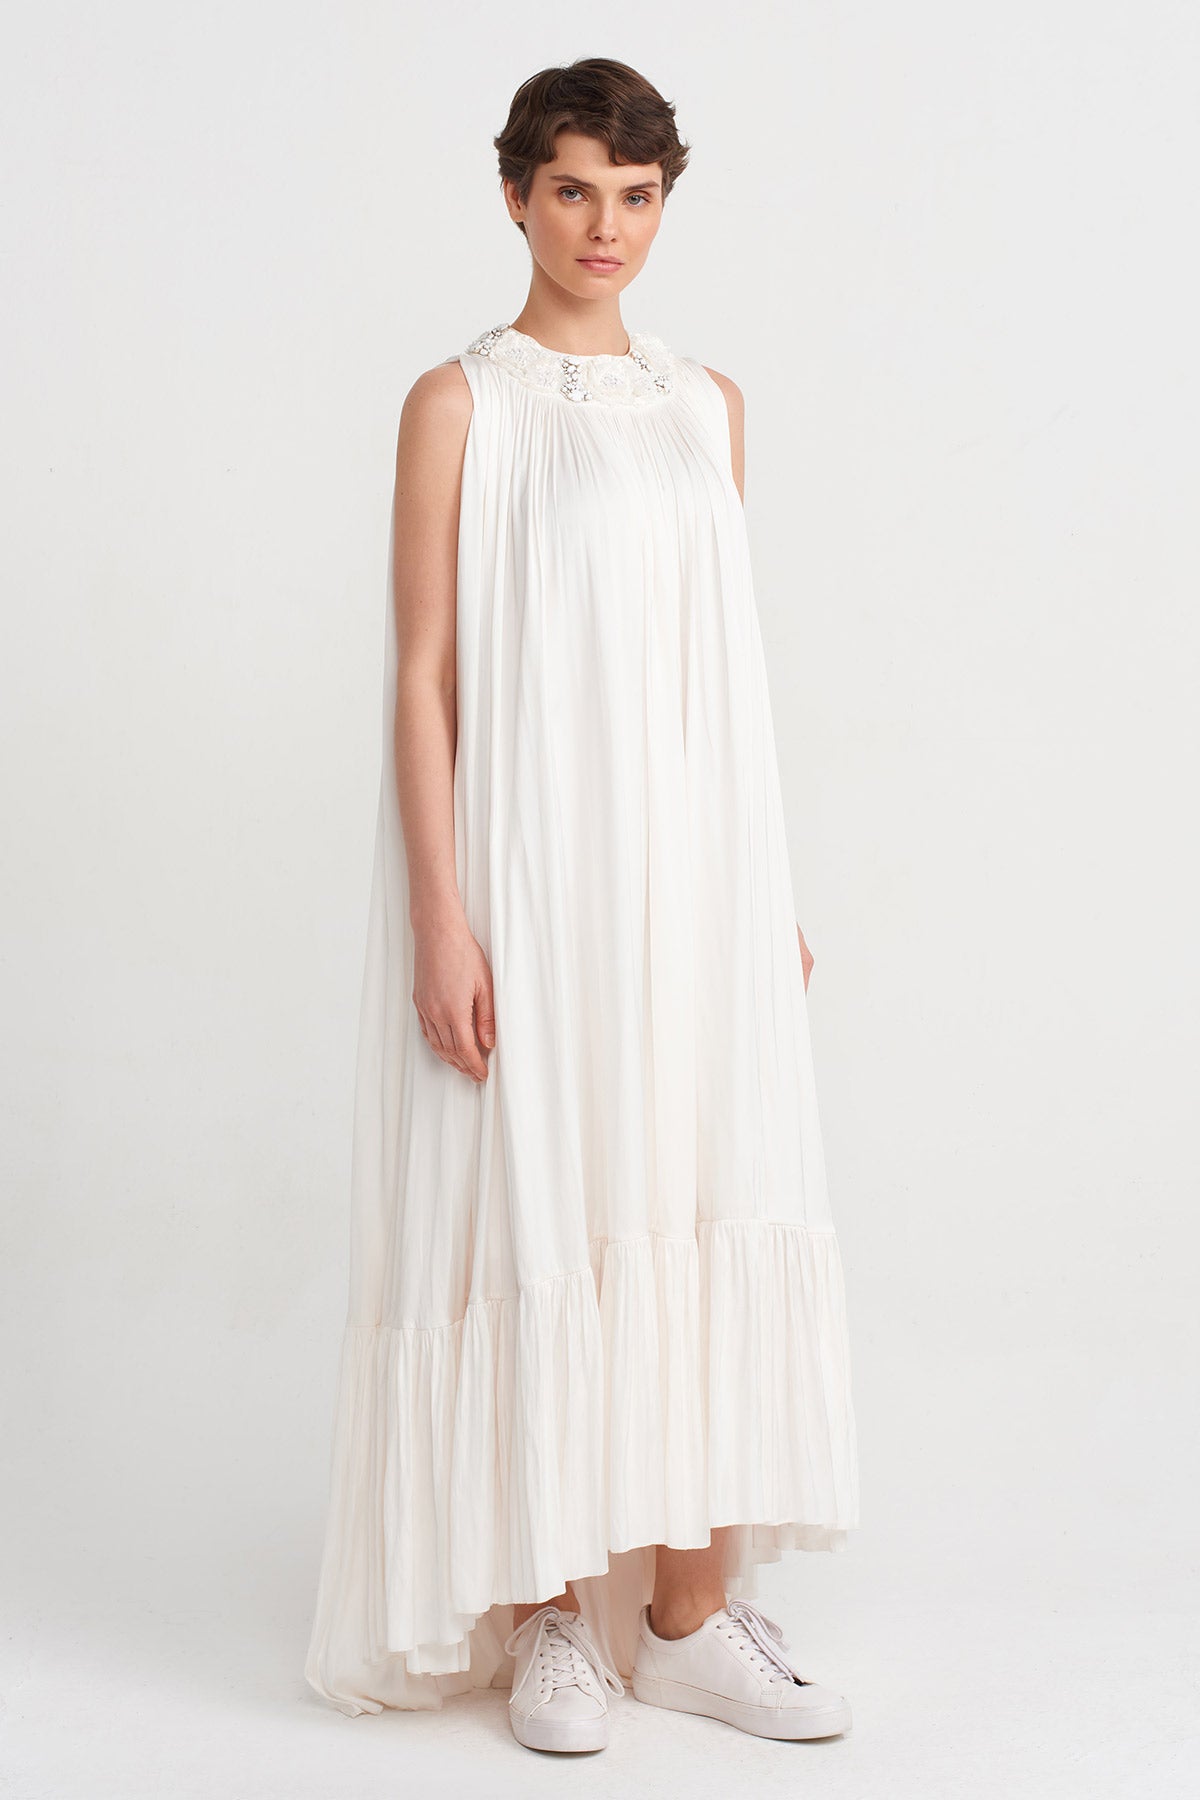 Off White Embroidered Collar, Long Elegant Dress-Y244014129